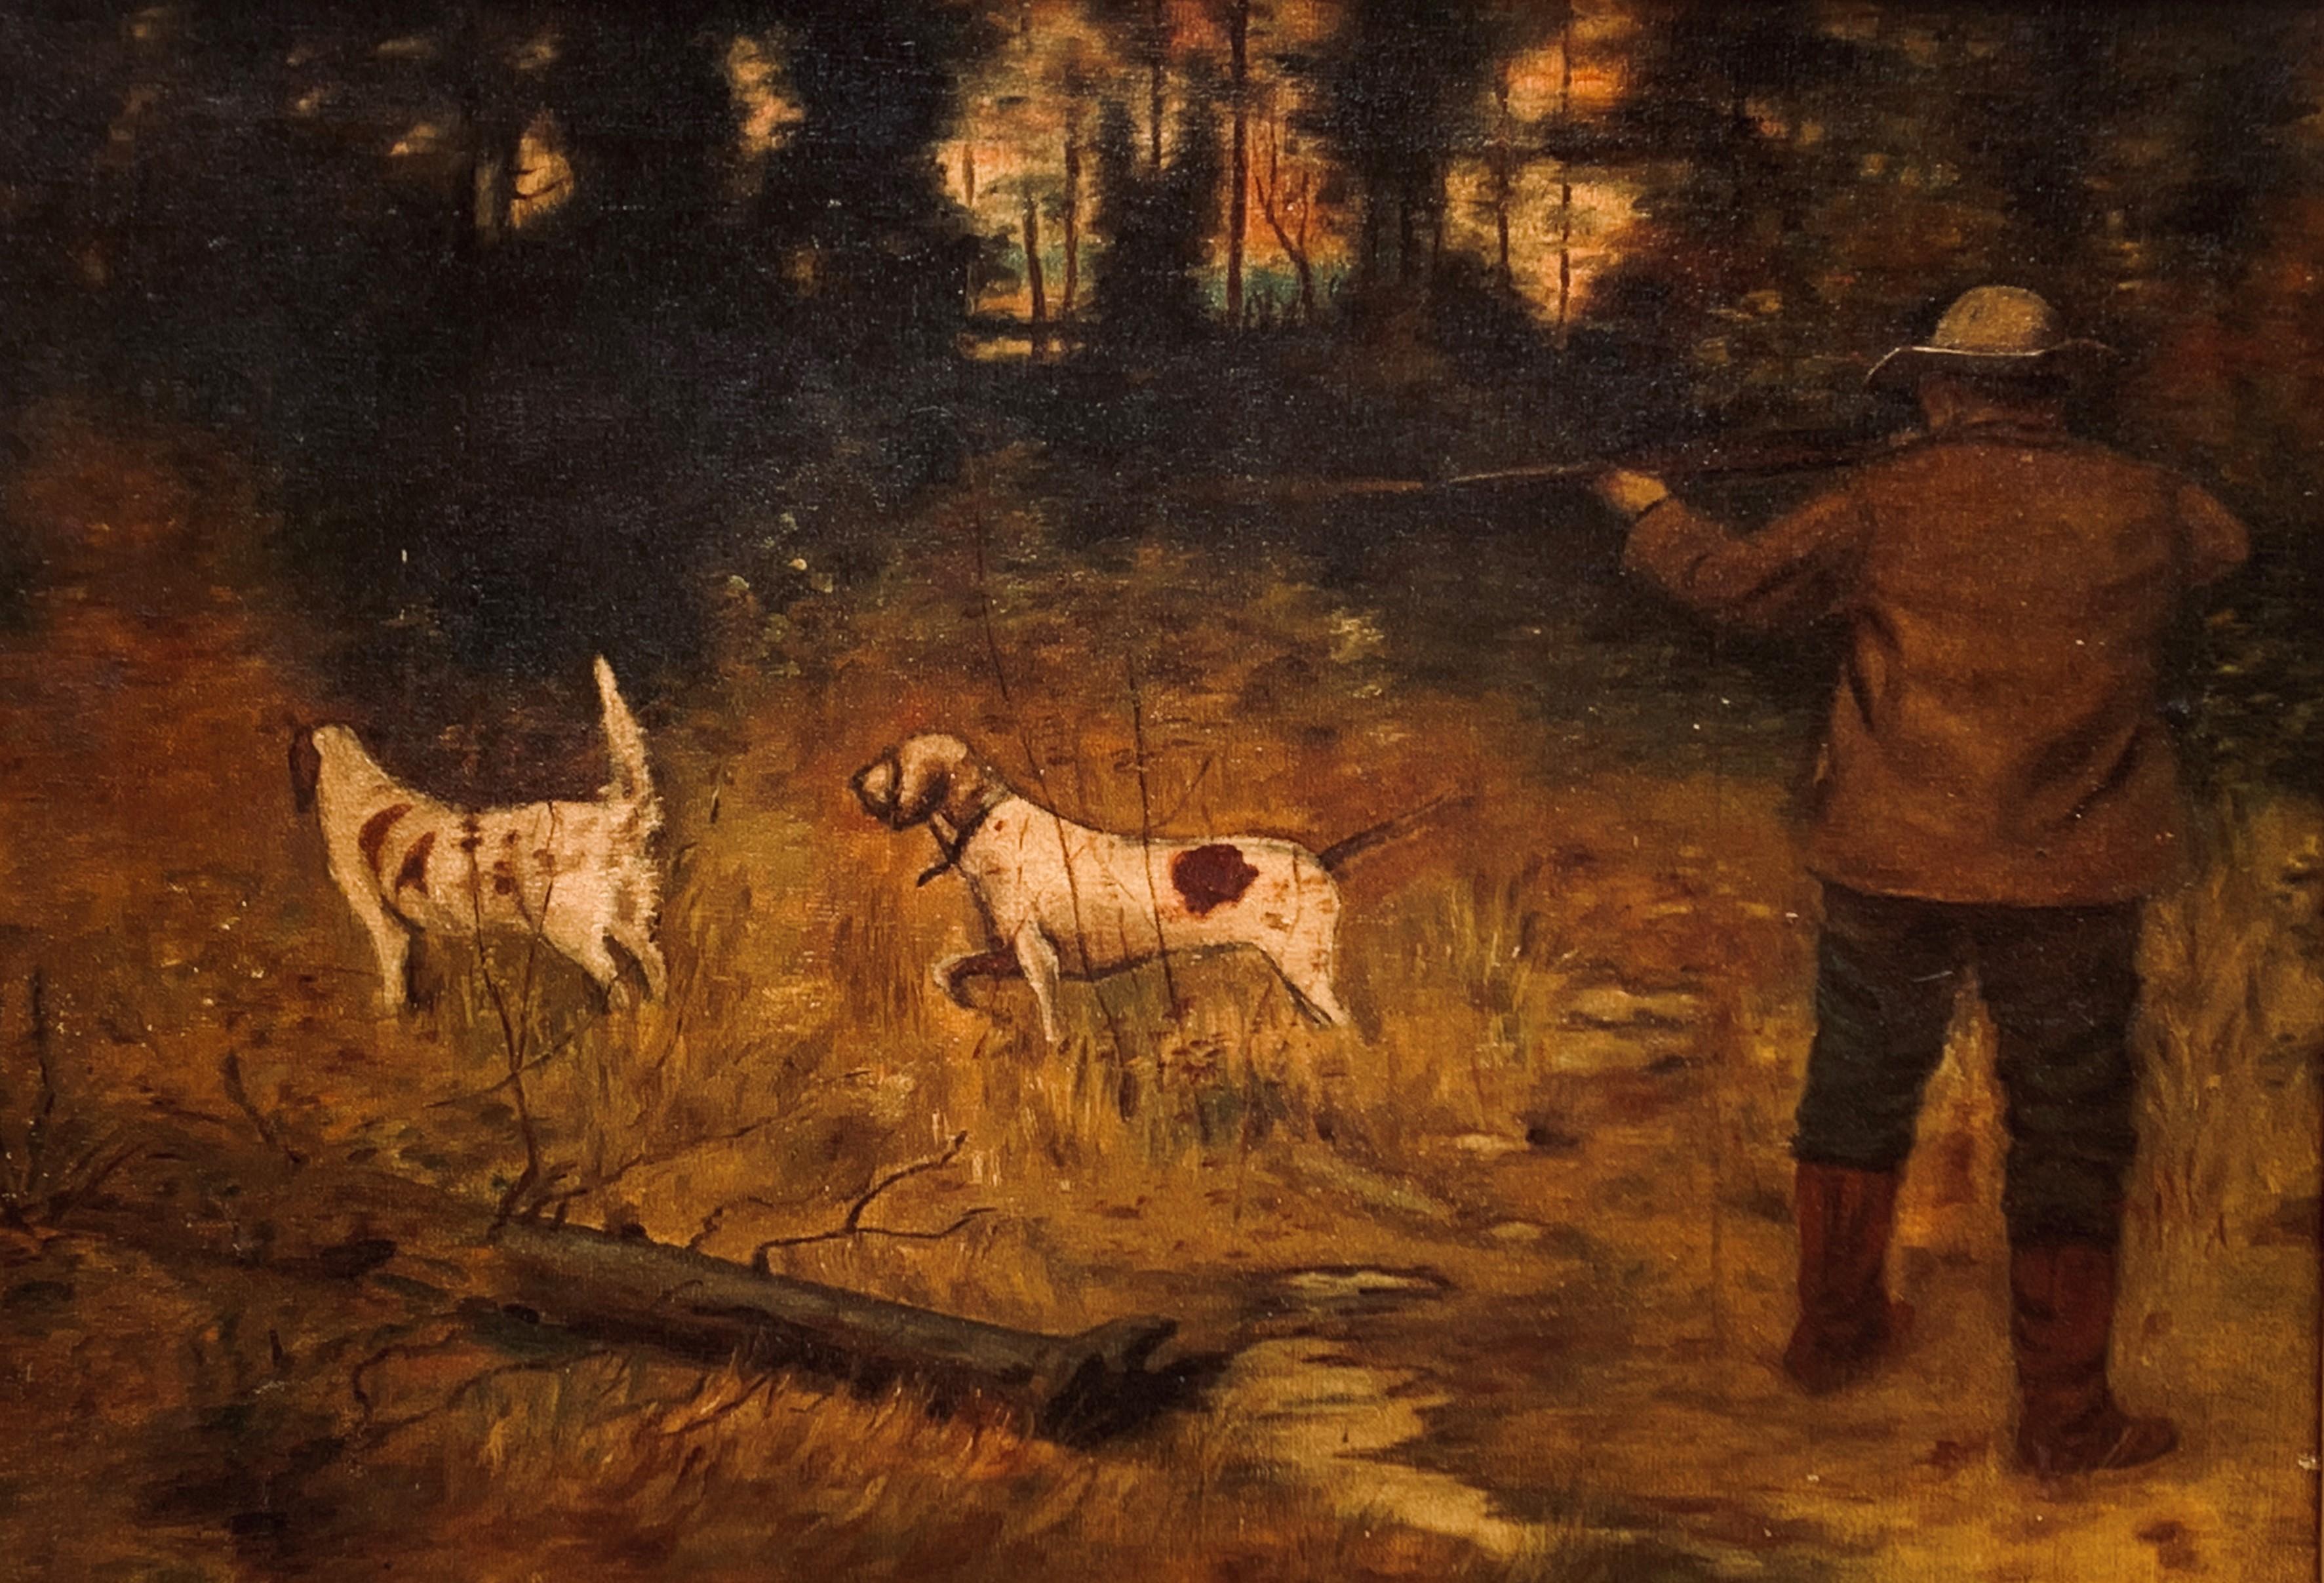 Possibly by Arthur B. Frost, Illustration of Hunter with Dogs - Painting by Arthur Burdett Frost